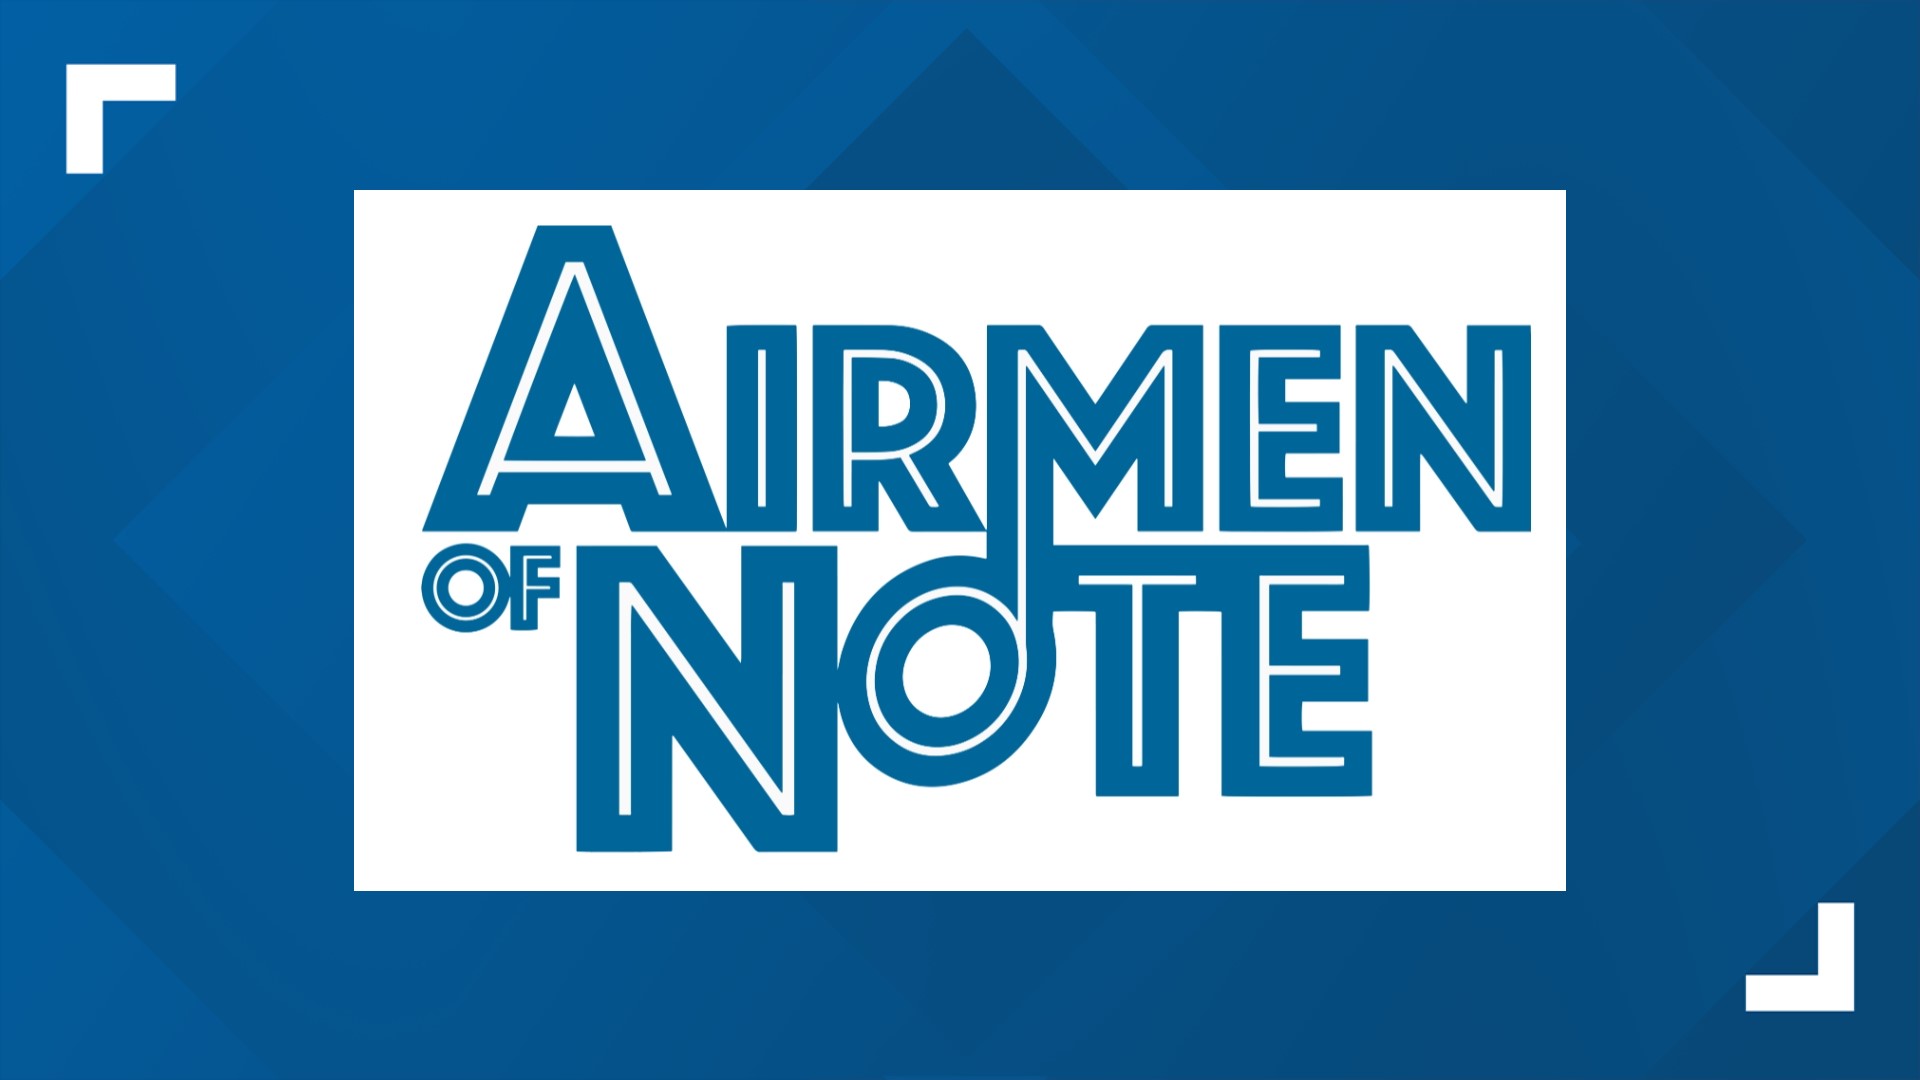 The Airmen of Note is one of the six performing ensembles within The United States Air Force Band, the premier musical organization of the U.S. Air Force.